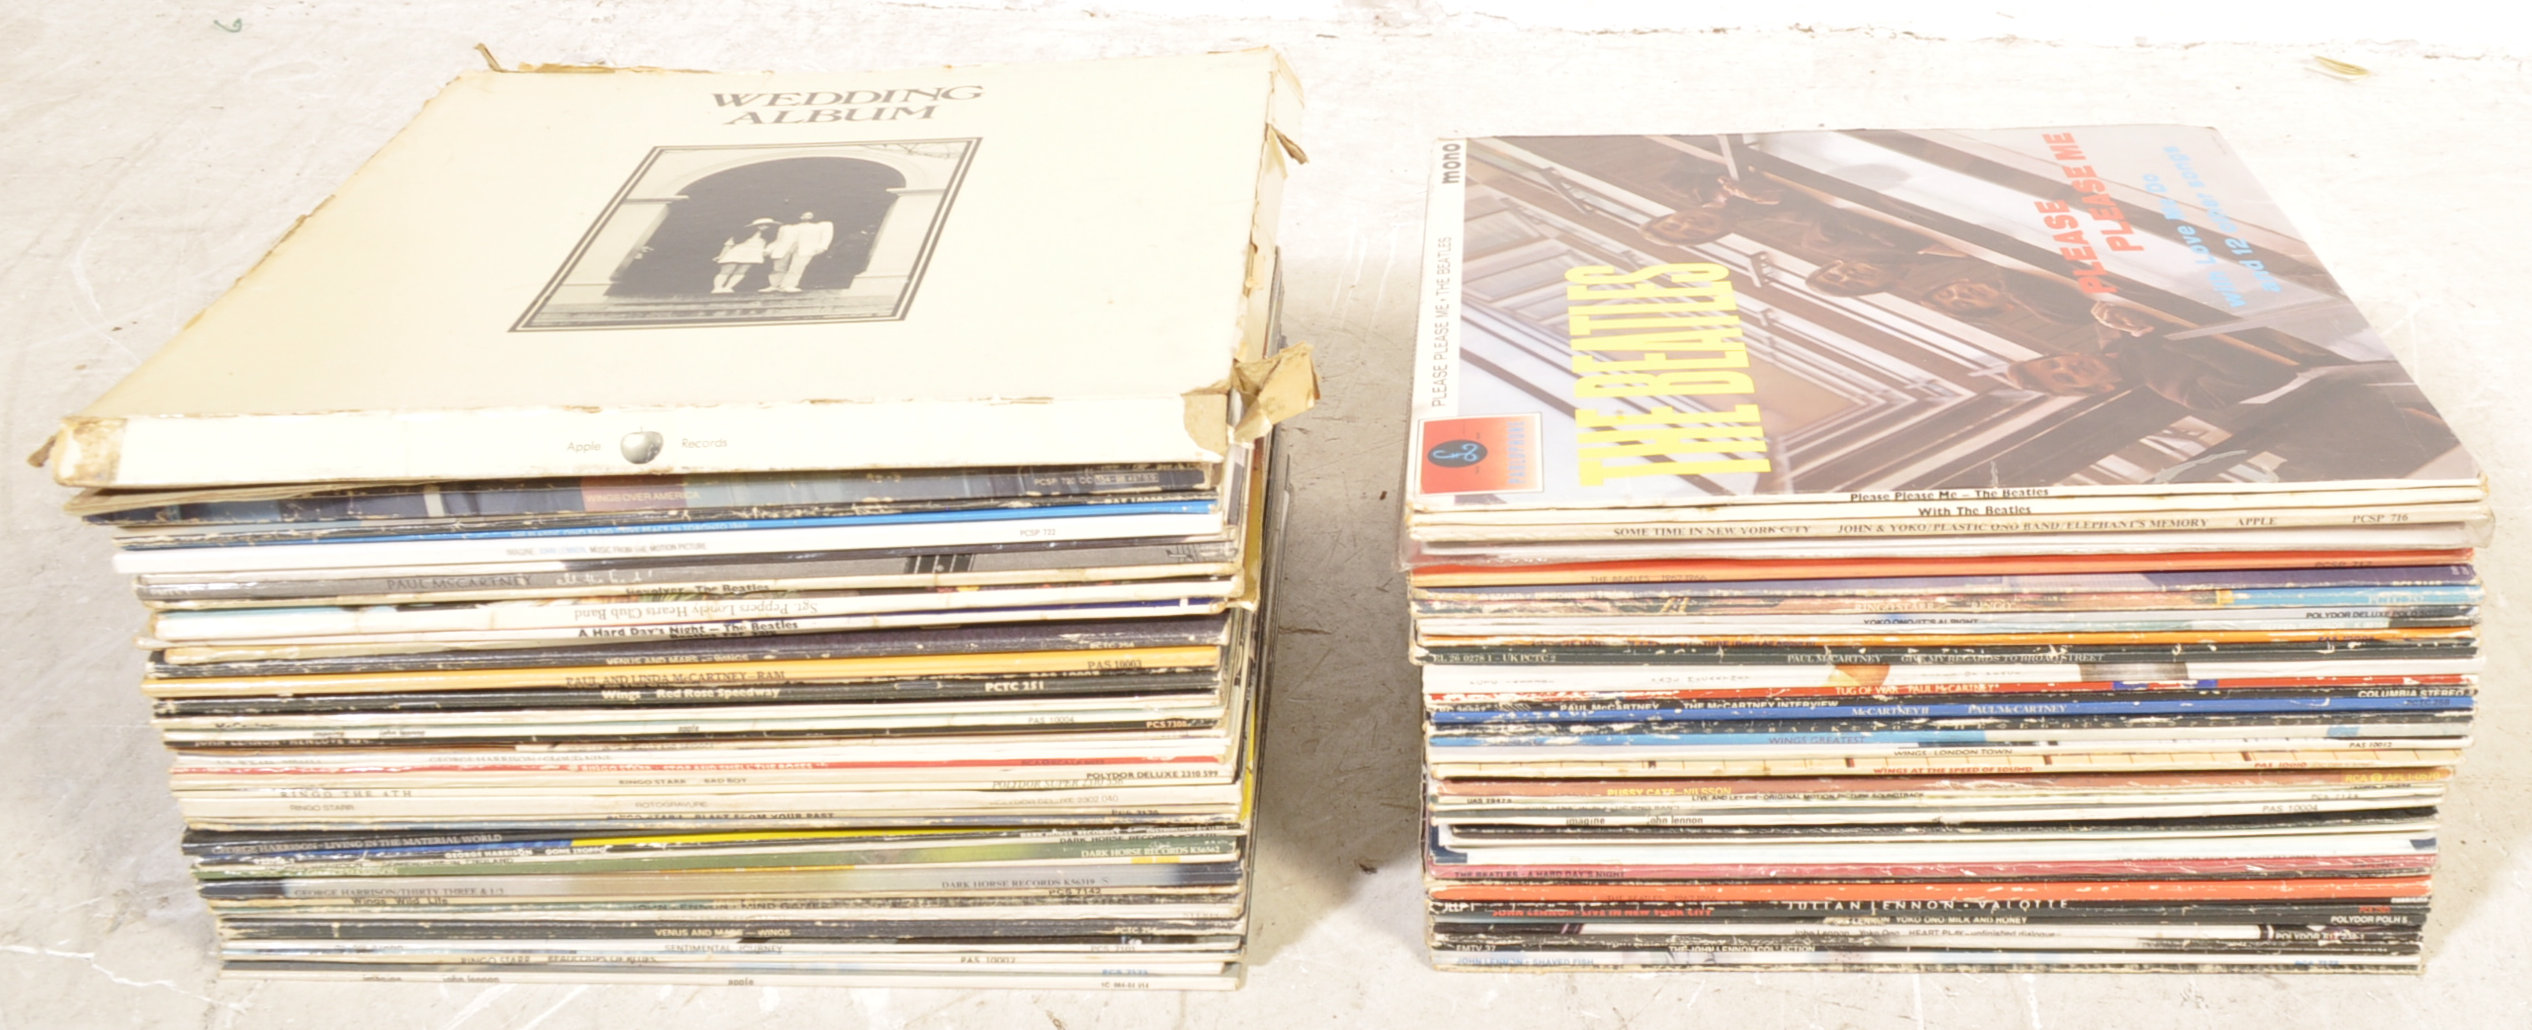 THE BEATLES & RELATED - COLLECTION OF 70+ VINYL RECORDS - Image 12 of 12